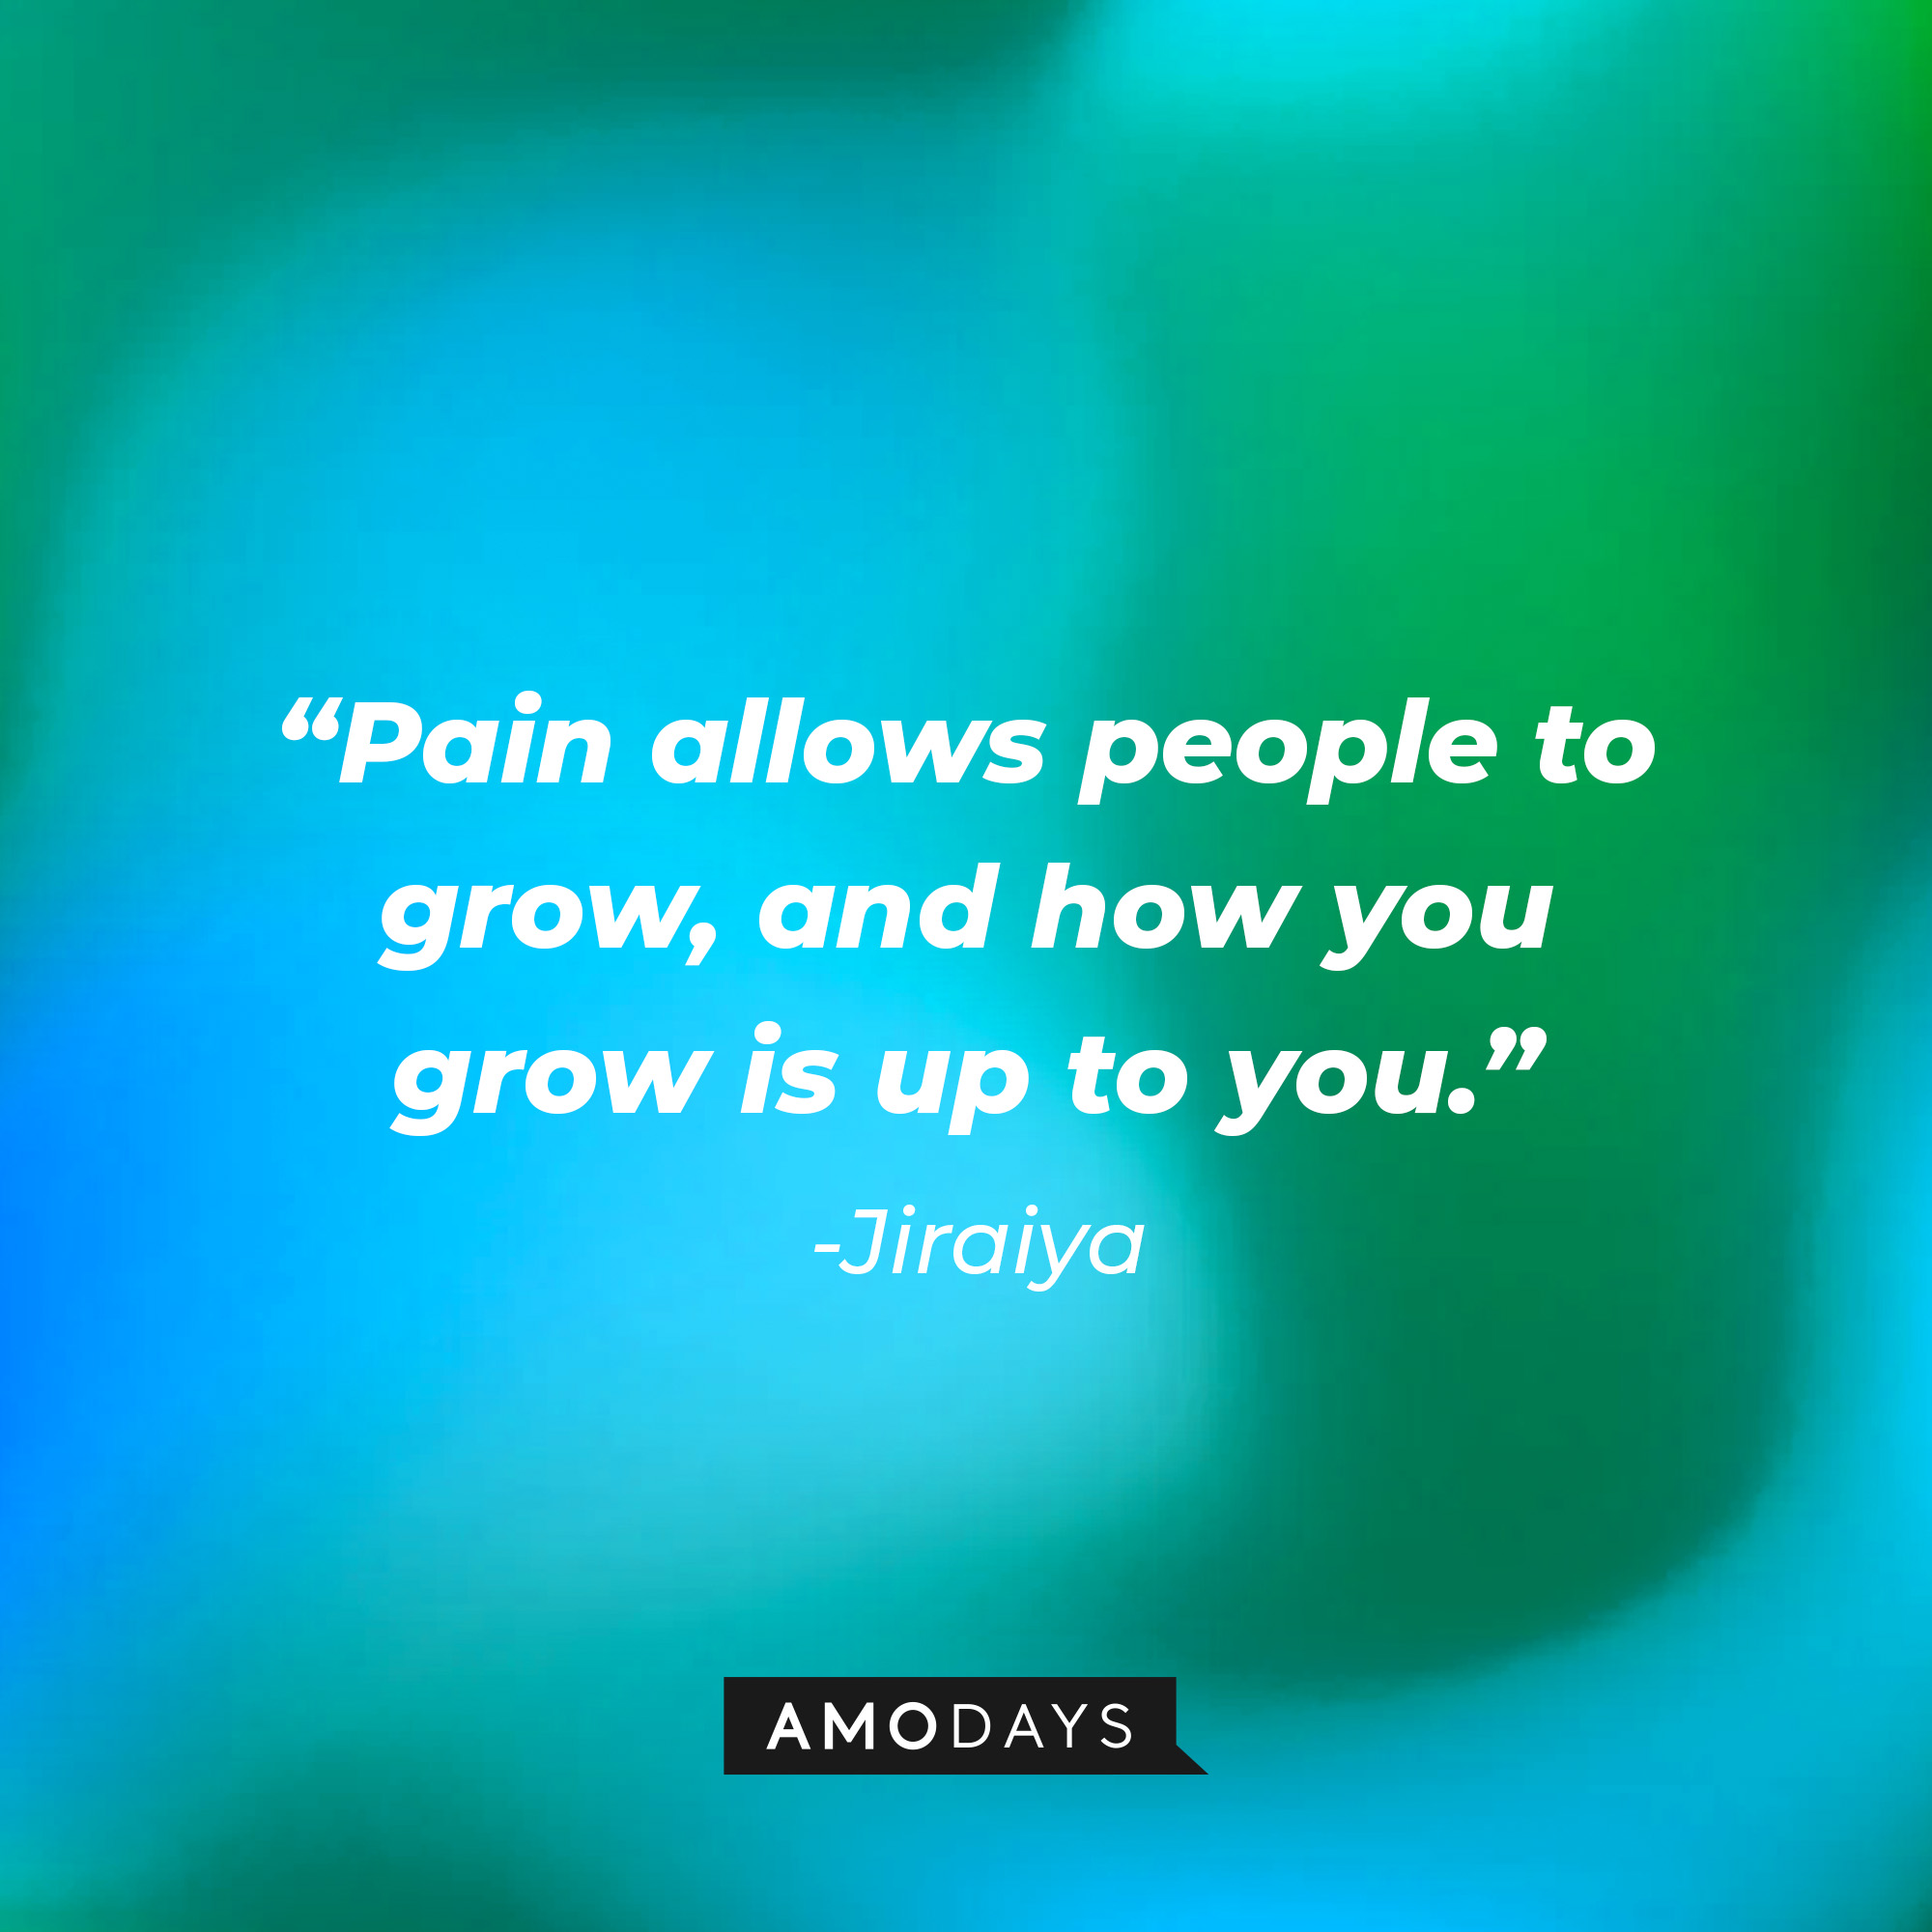 Jiraiya’s quote: “Pain allows people to grow, and how you grow is up to you.” │ Source: AmoDays